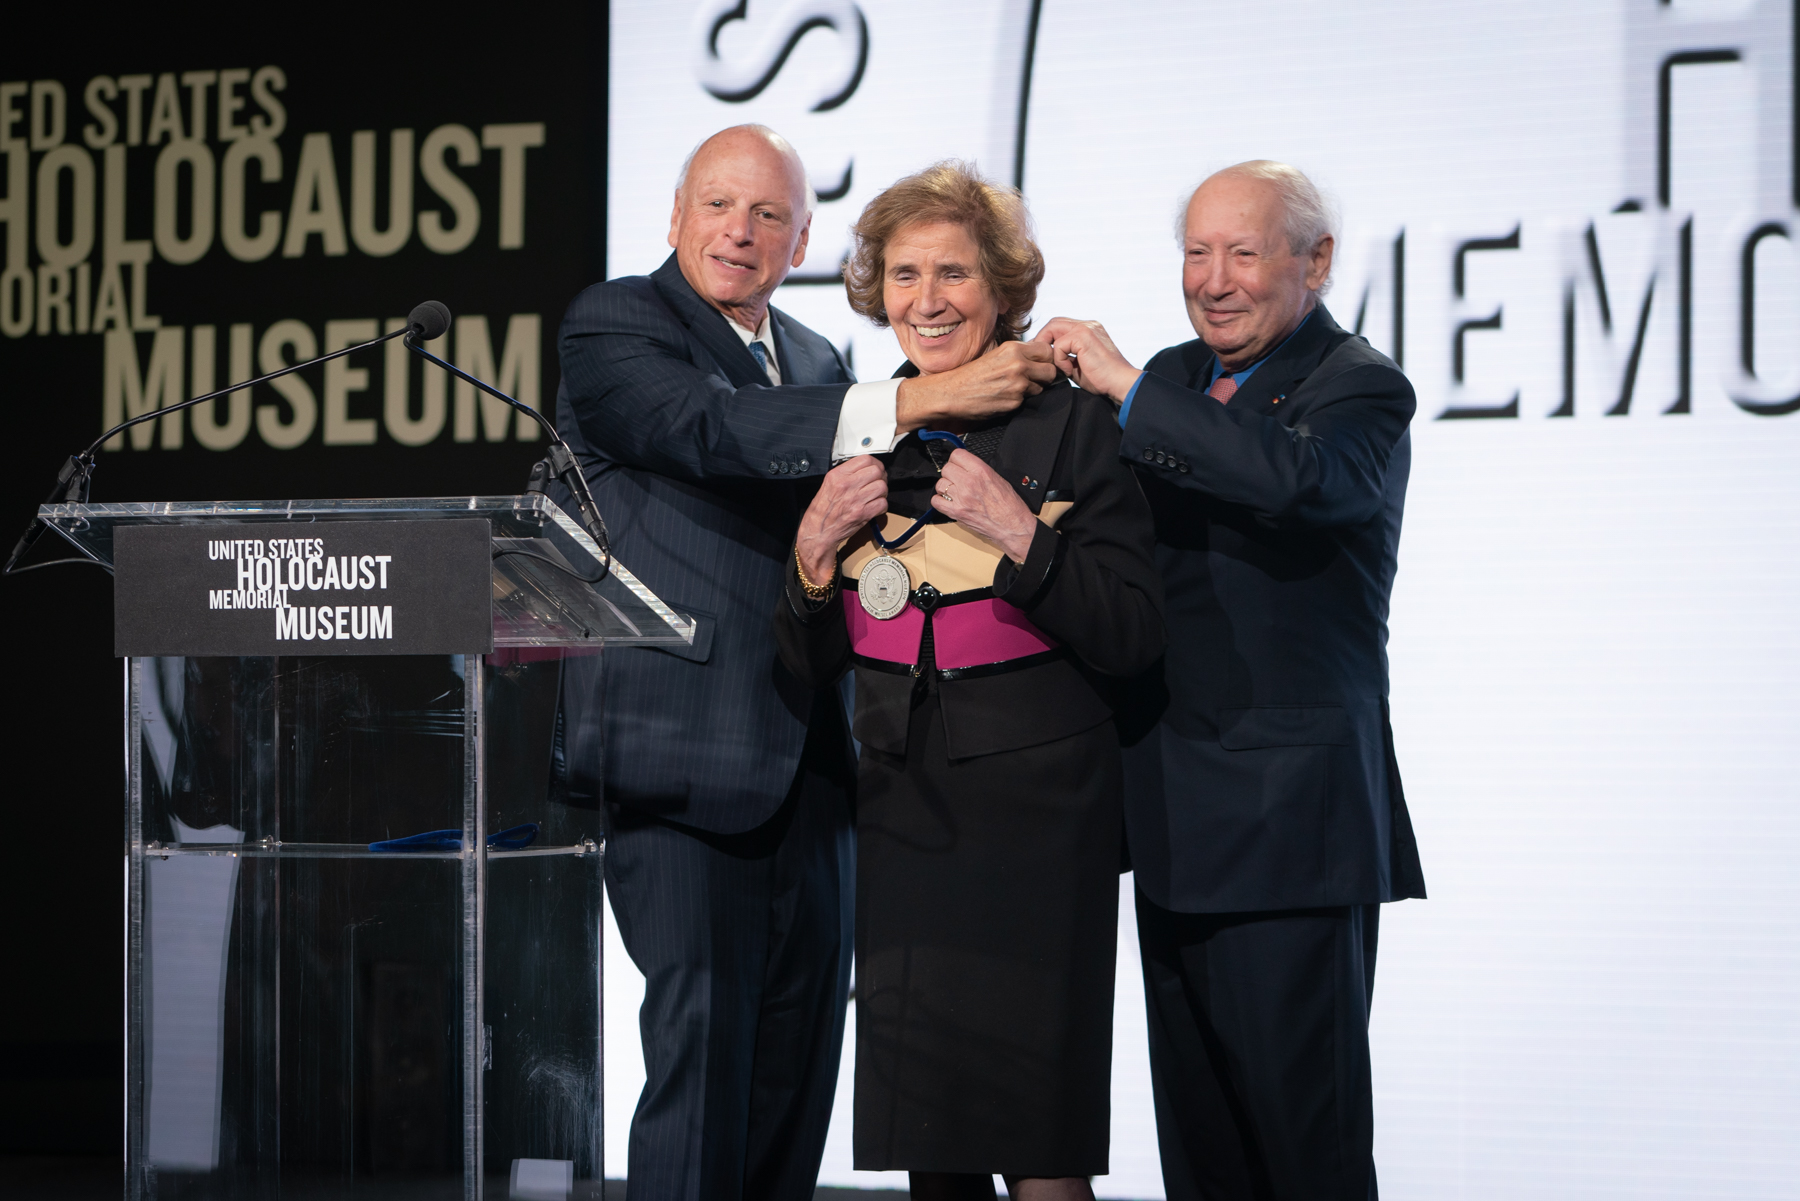 Serge and Beate Klarsfeld receive the 2019 Elie Wiesel Award, the United States Holocaust Memorial Museum’s highest honor, for their contributions to Holocaust memory, education and justice from Museum Chairman Howard Lorber. Credit: Carl Cox for U.S. Holocaust Memorial Museum
